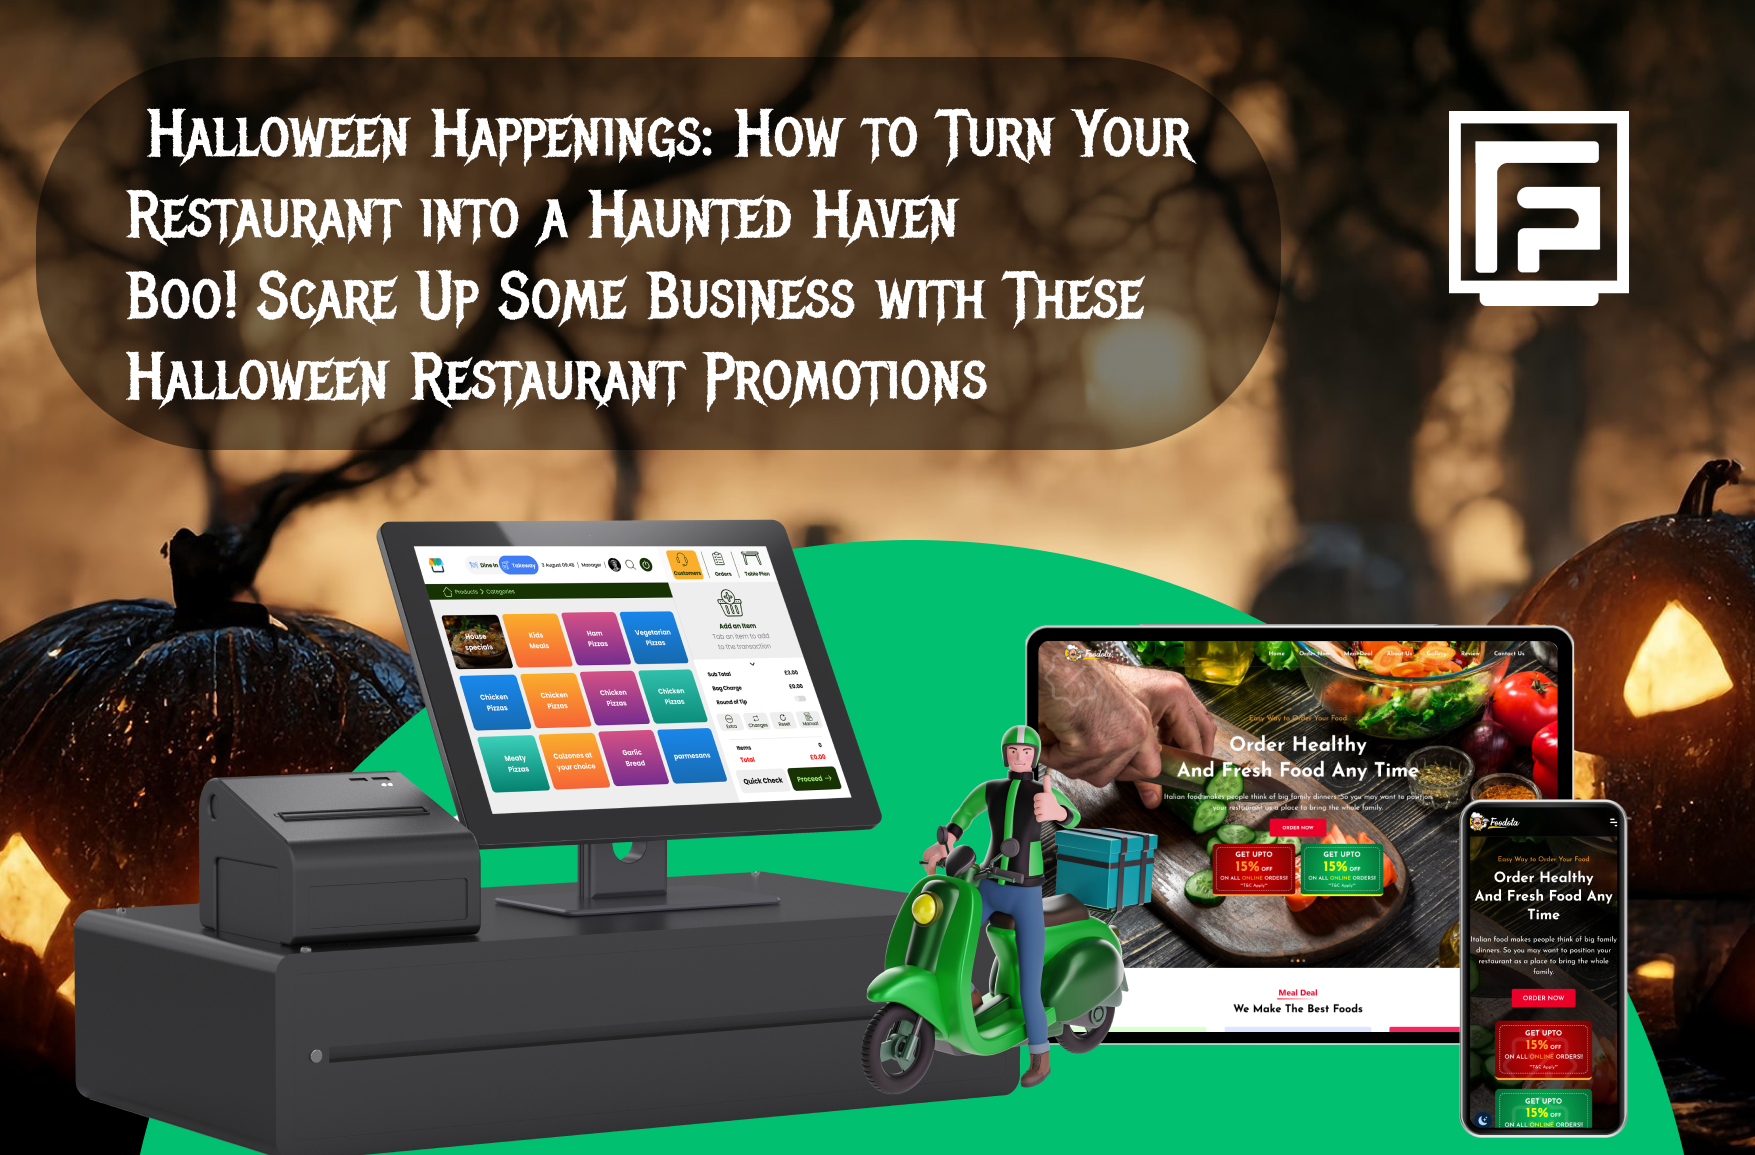 Scare Up Business with FusionPOS